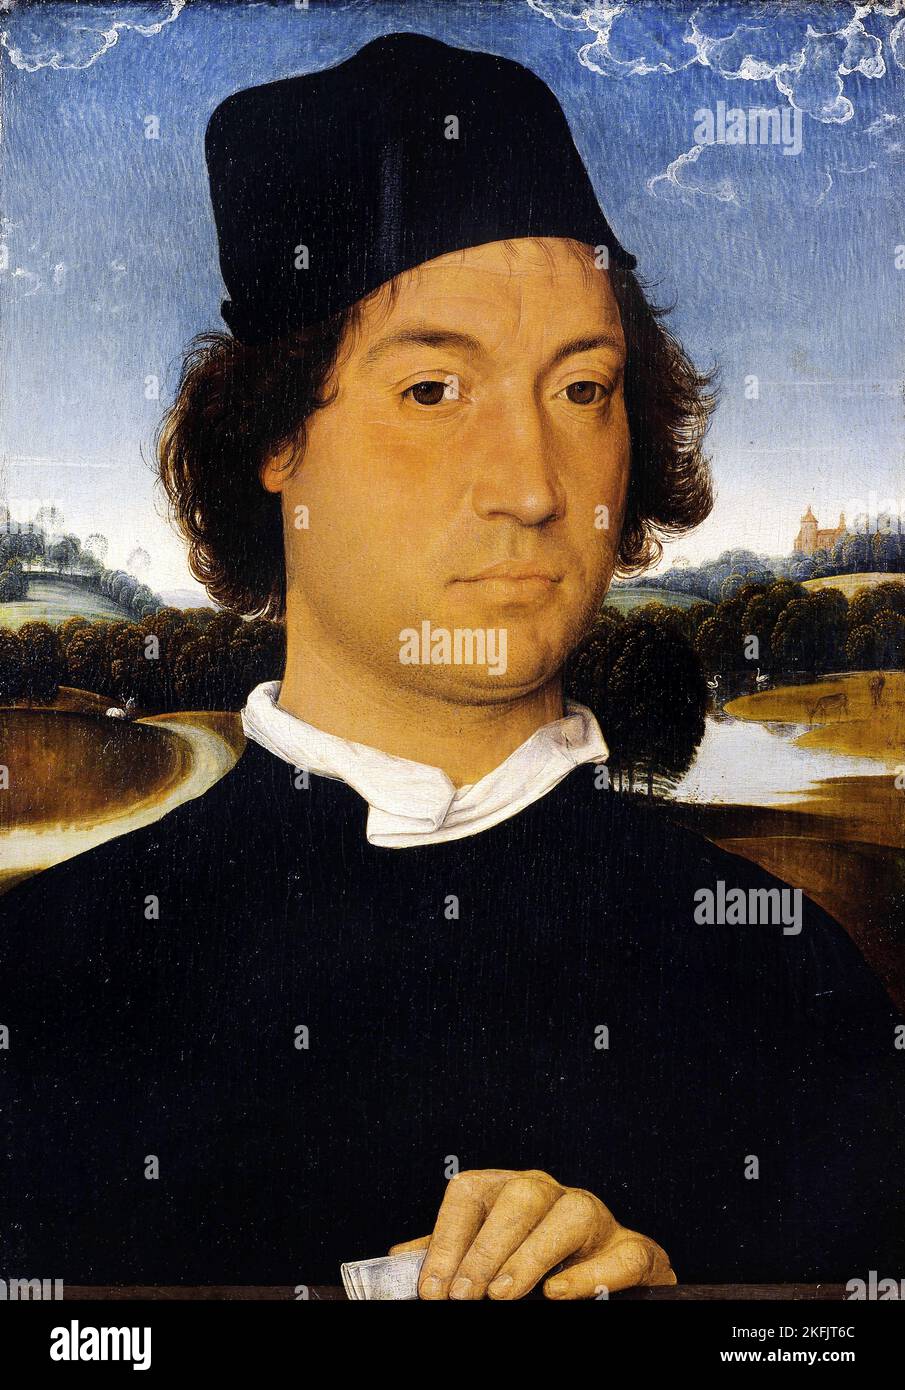 Hans Memling; Portrait of an Unknown Man with a Letternk; Circa 1485-1489; Oil on panel; Uffizi Gallery, Florence, Italy. Stock Photo